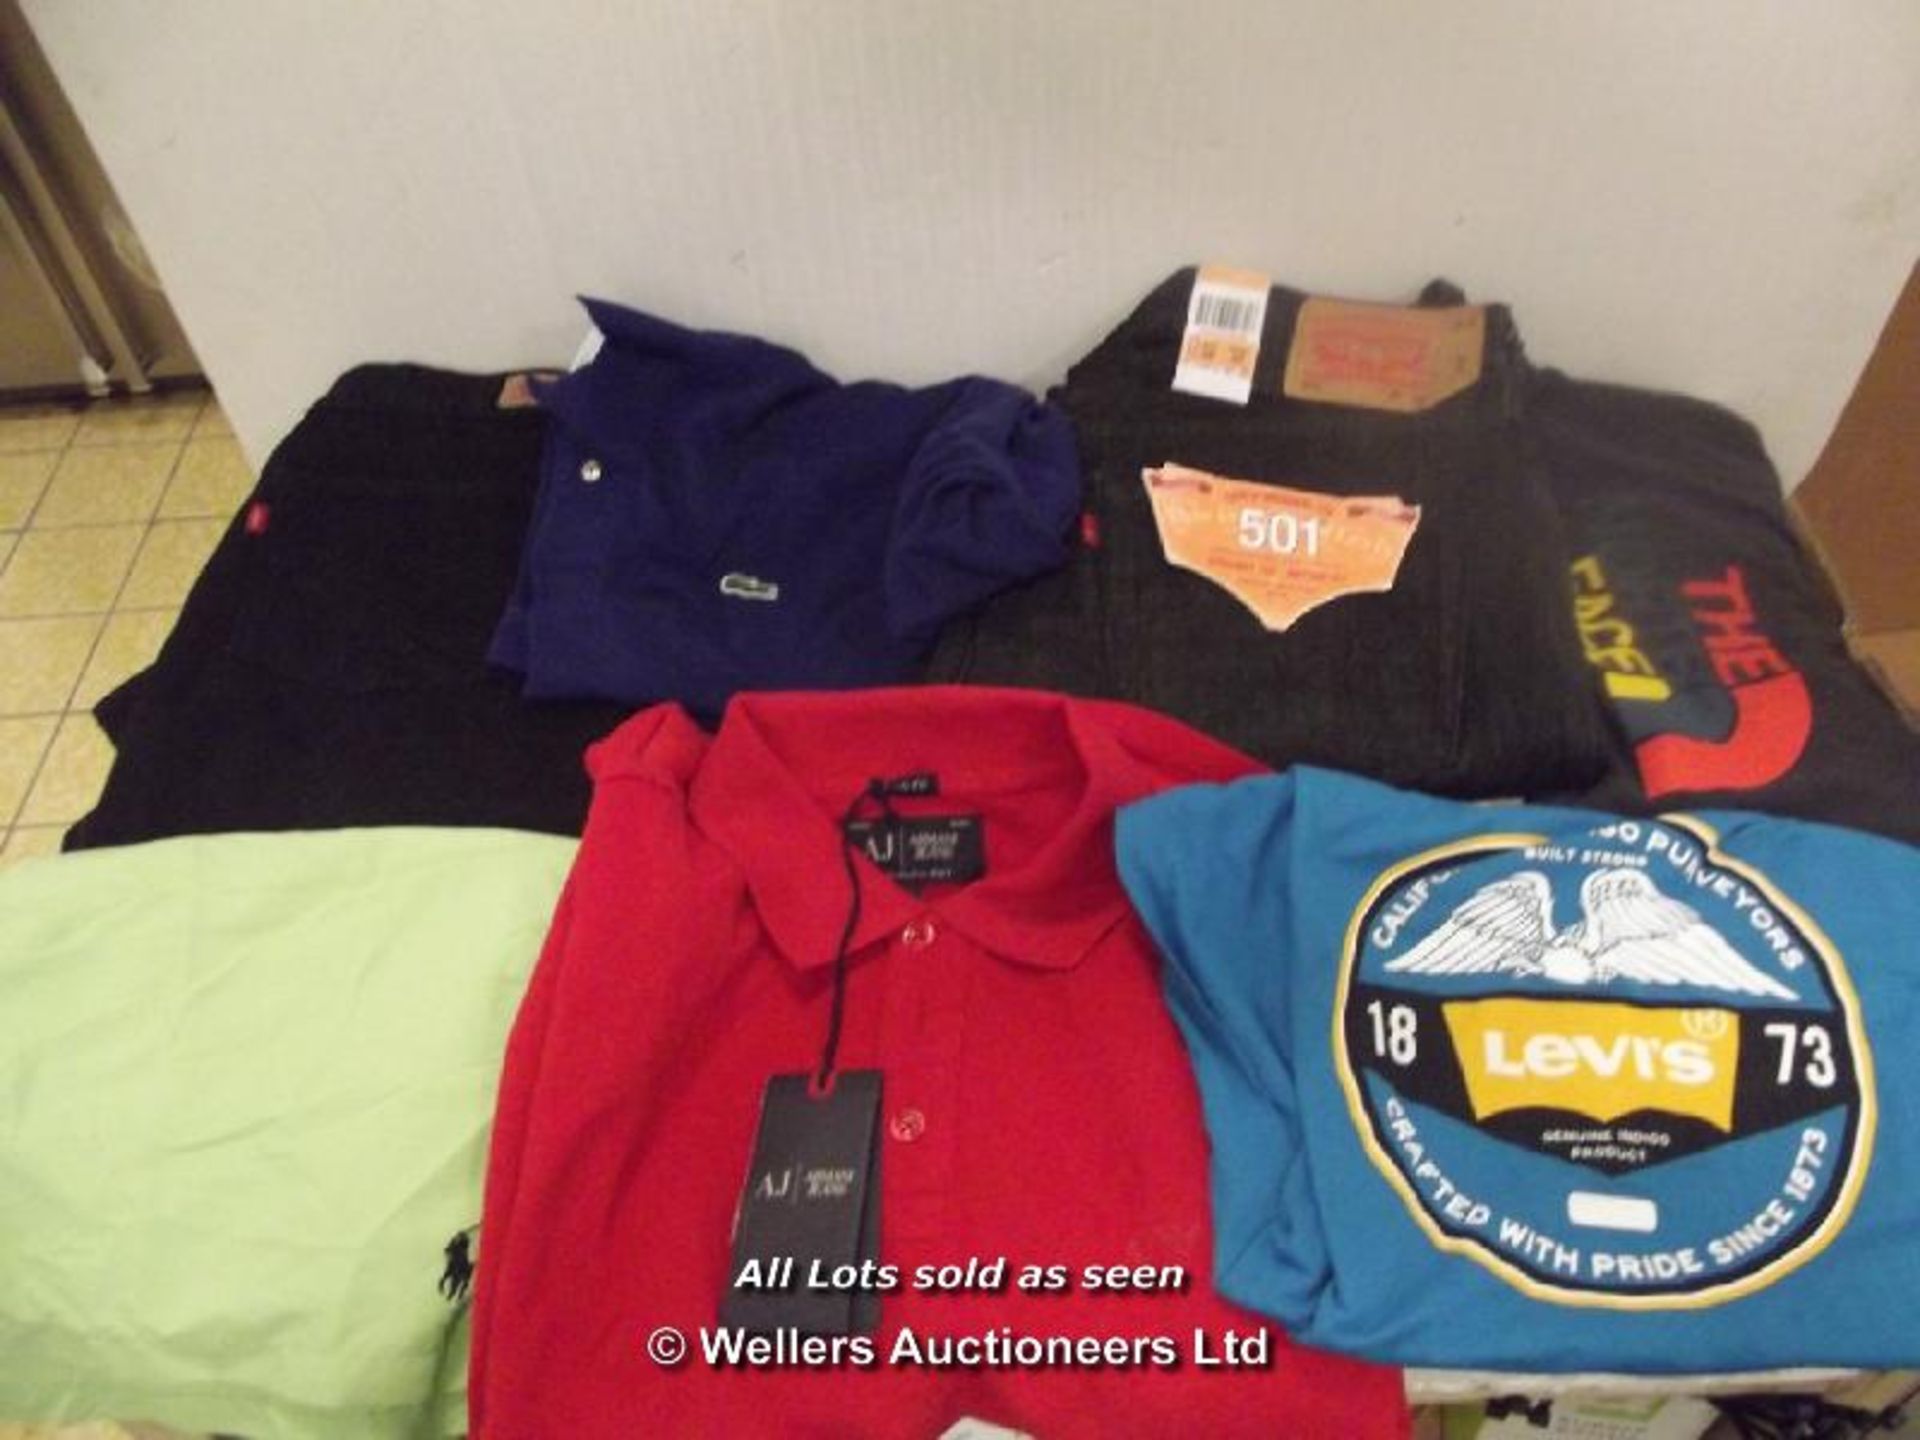 7X BRANDED CLOTHES INC ARMANI POLO W/TAGS, LACOSTE POLO, NORTH FACE TEE, RALPH LAUREN SHORTS, LEVI - Image 2 of 2